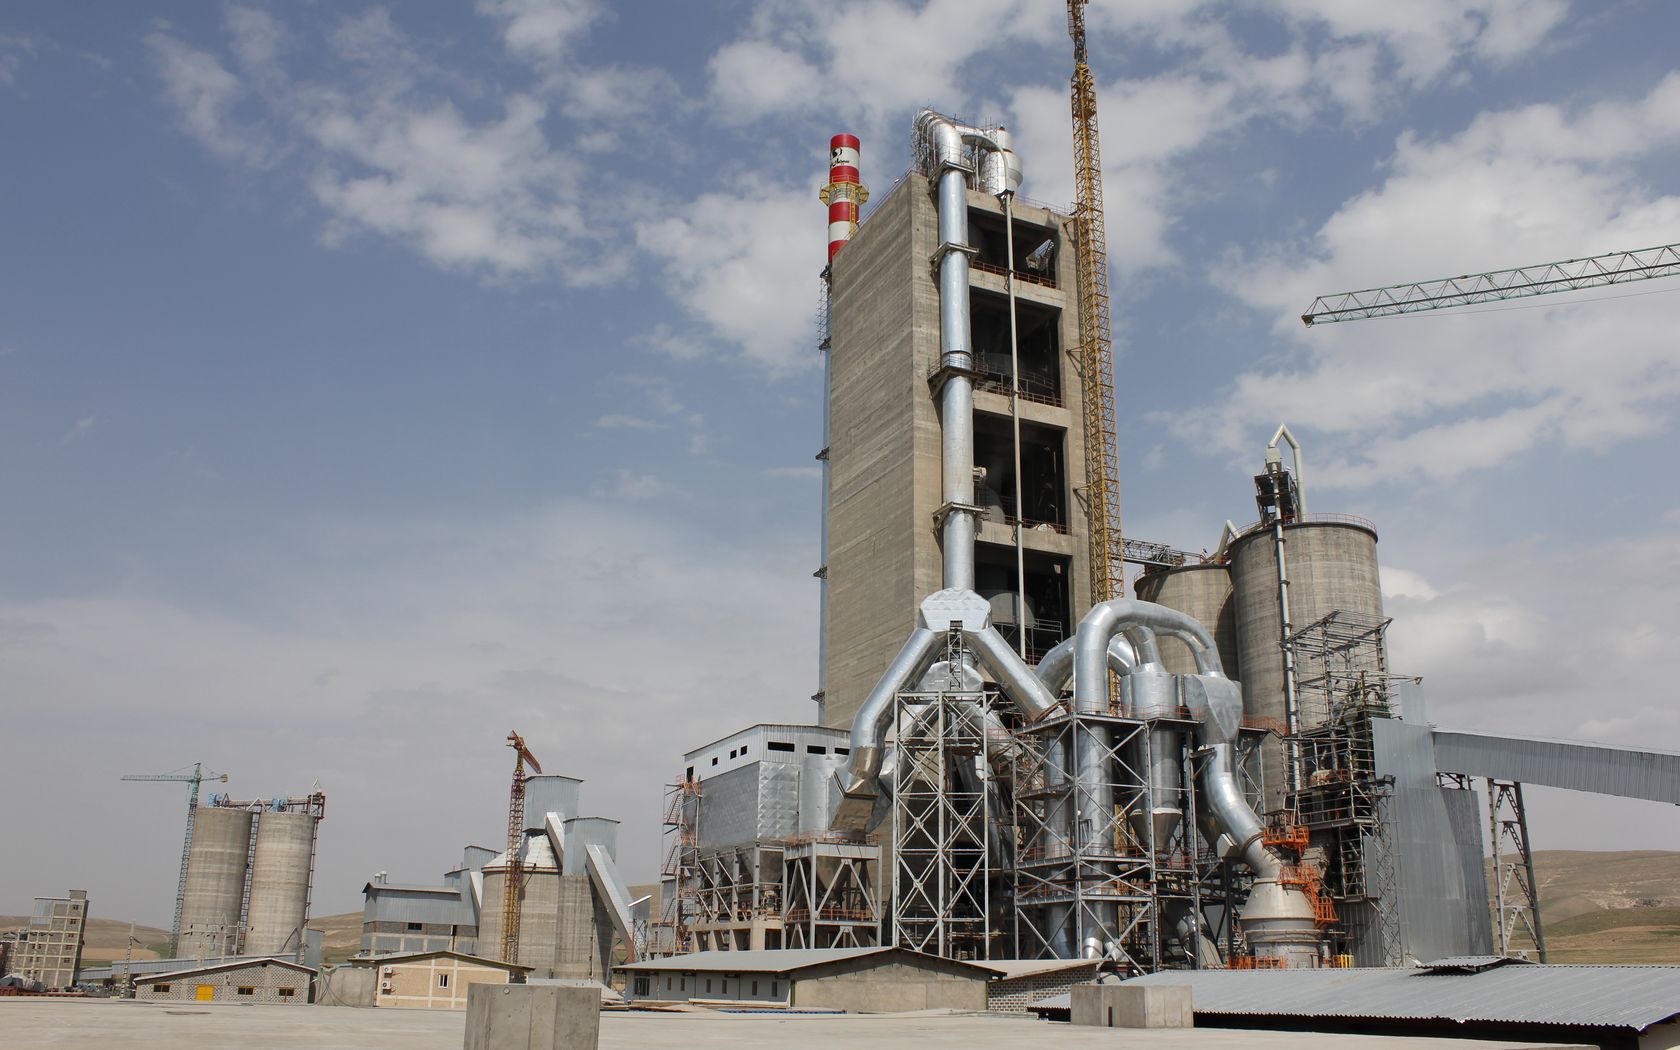 No Concrete Solution for Cement Industry Crisis